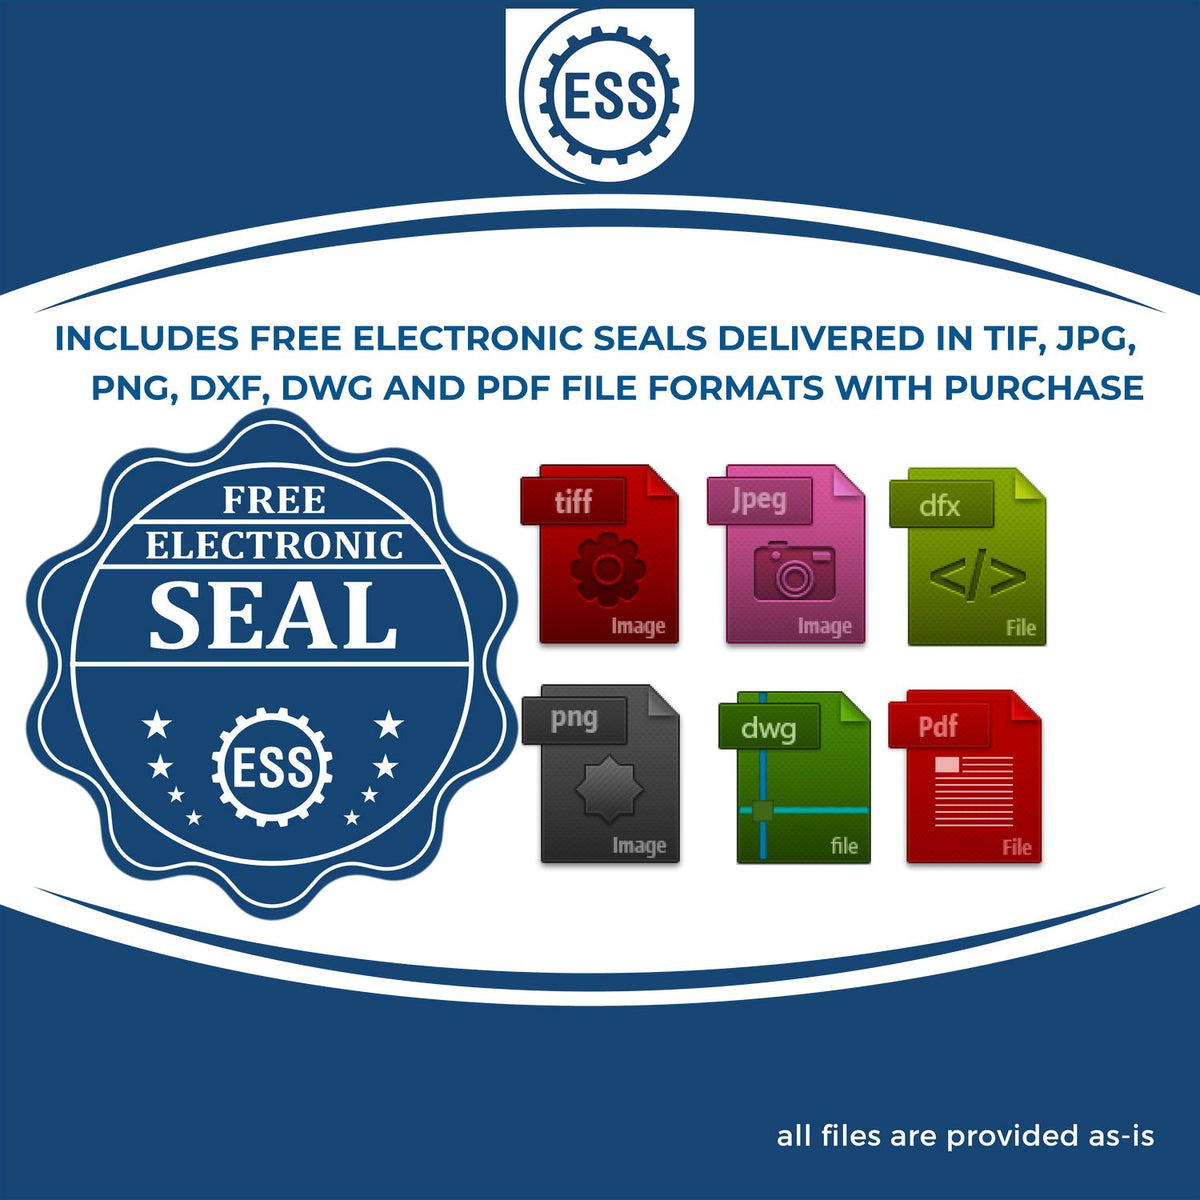 An infographic for the free electronic seal for the Gift Kentucky Architect Seal illustrating the different file type icons such as DXF, DWG, TIF, JPG and PNG.